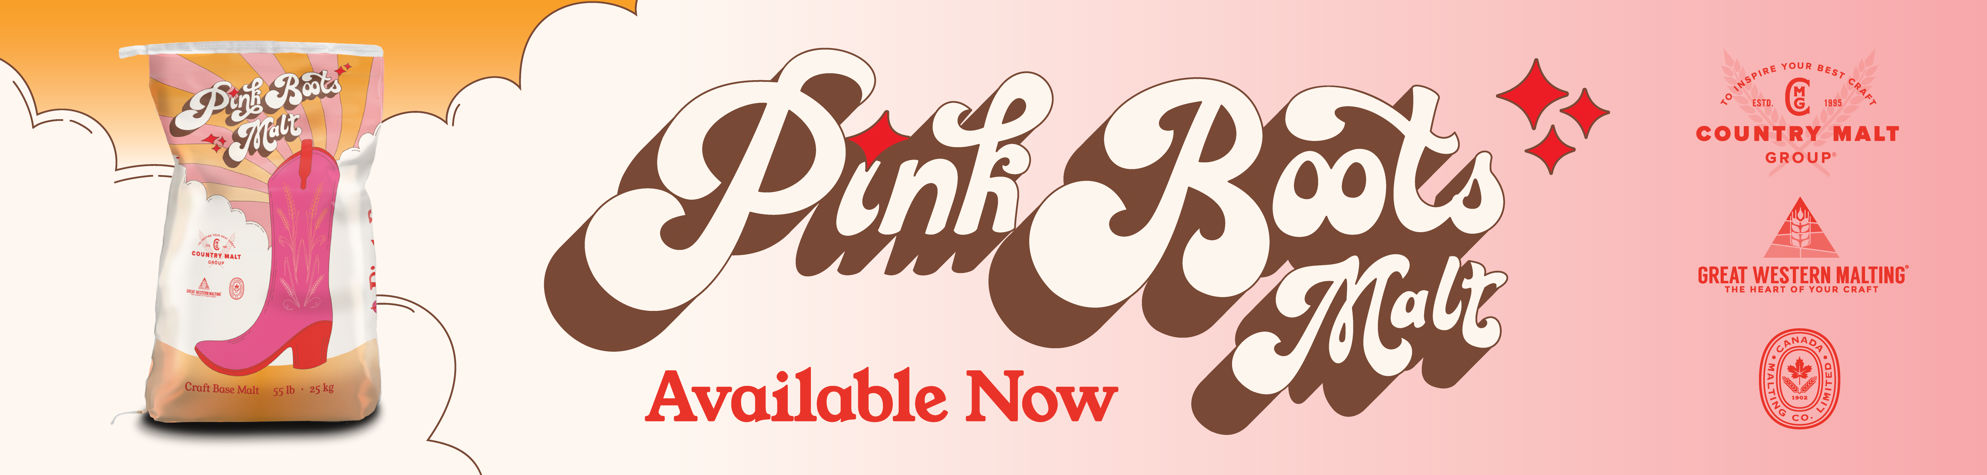 Pink Boots Malt Webpage Banner - Available Now